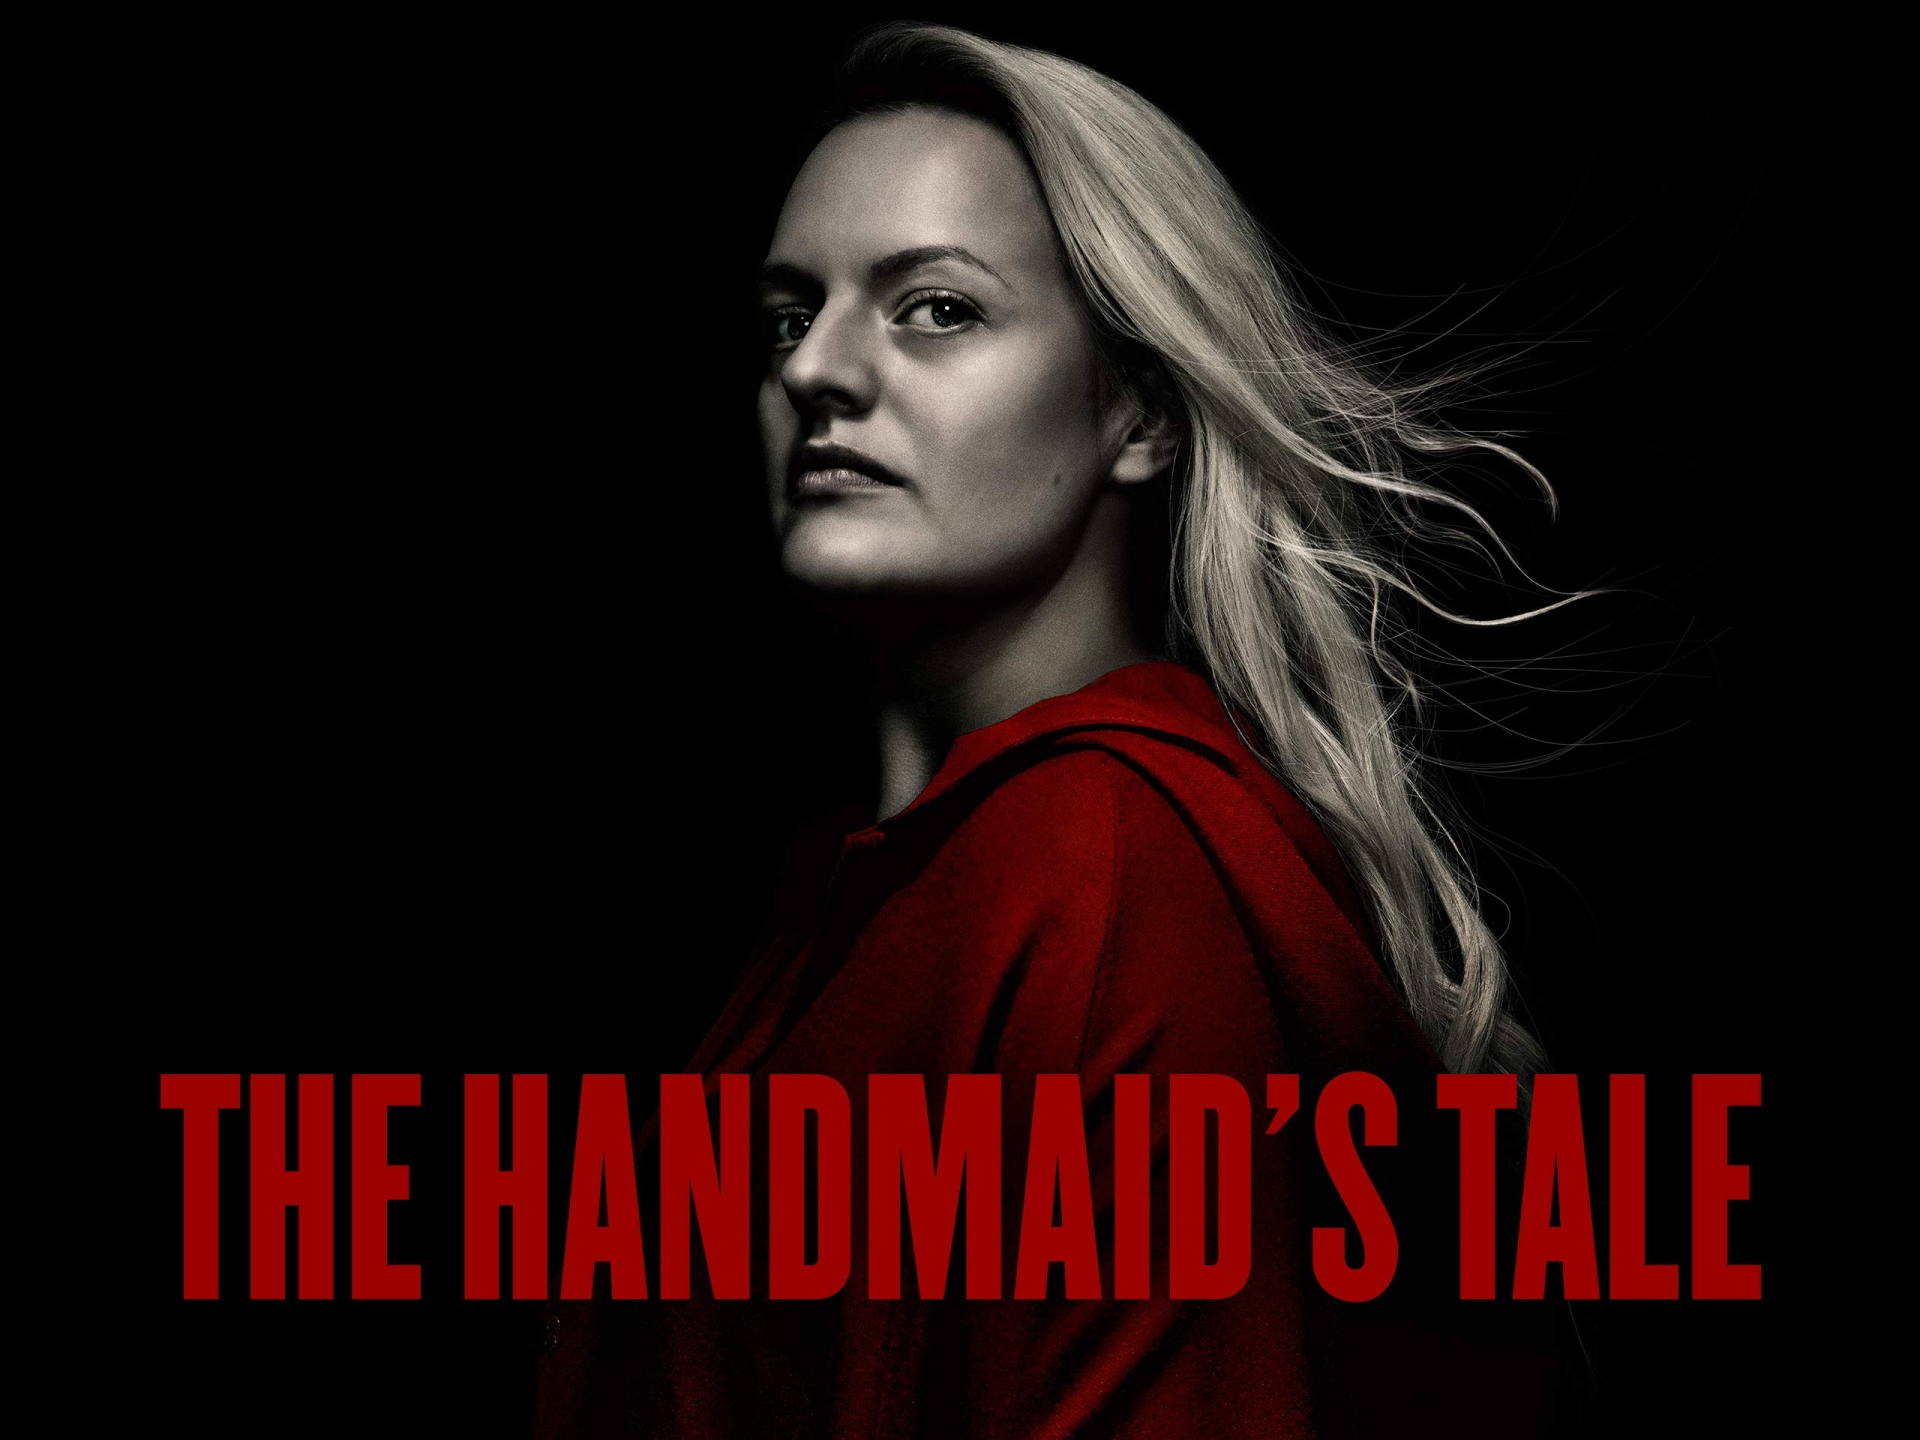 The Handmaid's Tale season 4 release date, cast, trailer, plot: When is the new series out? Photo: Amazon